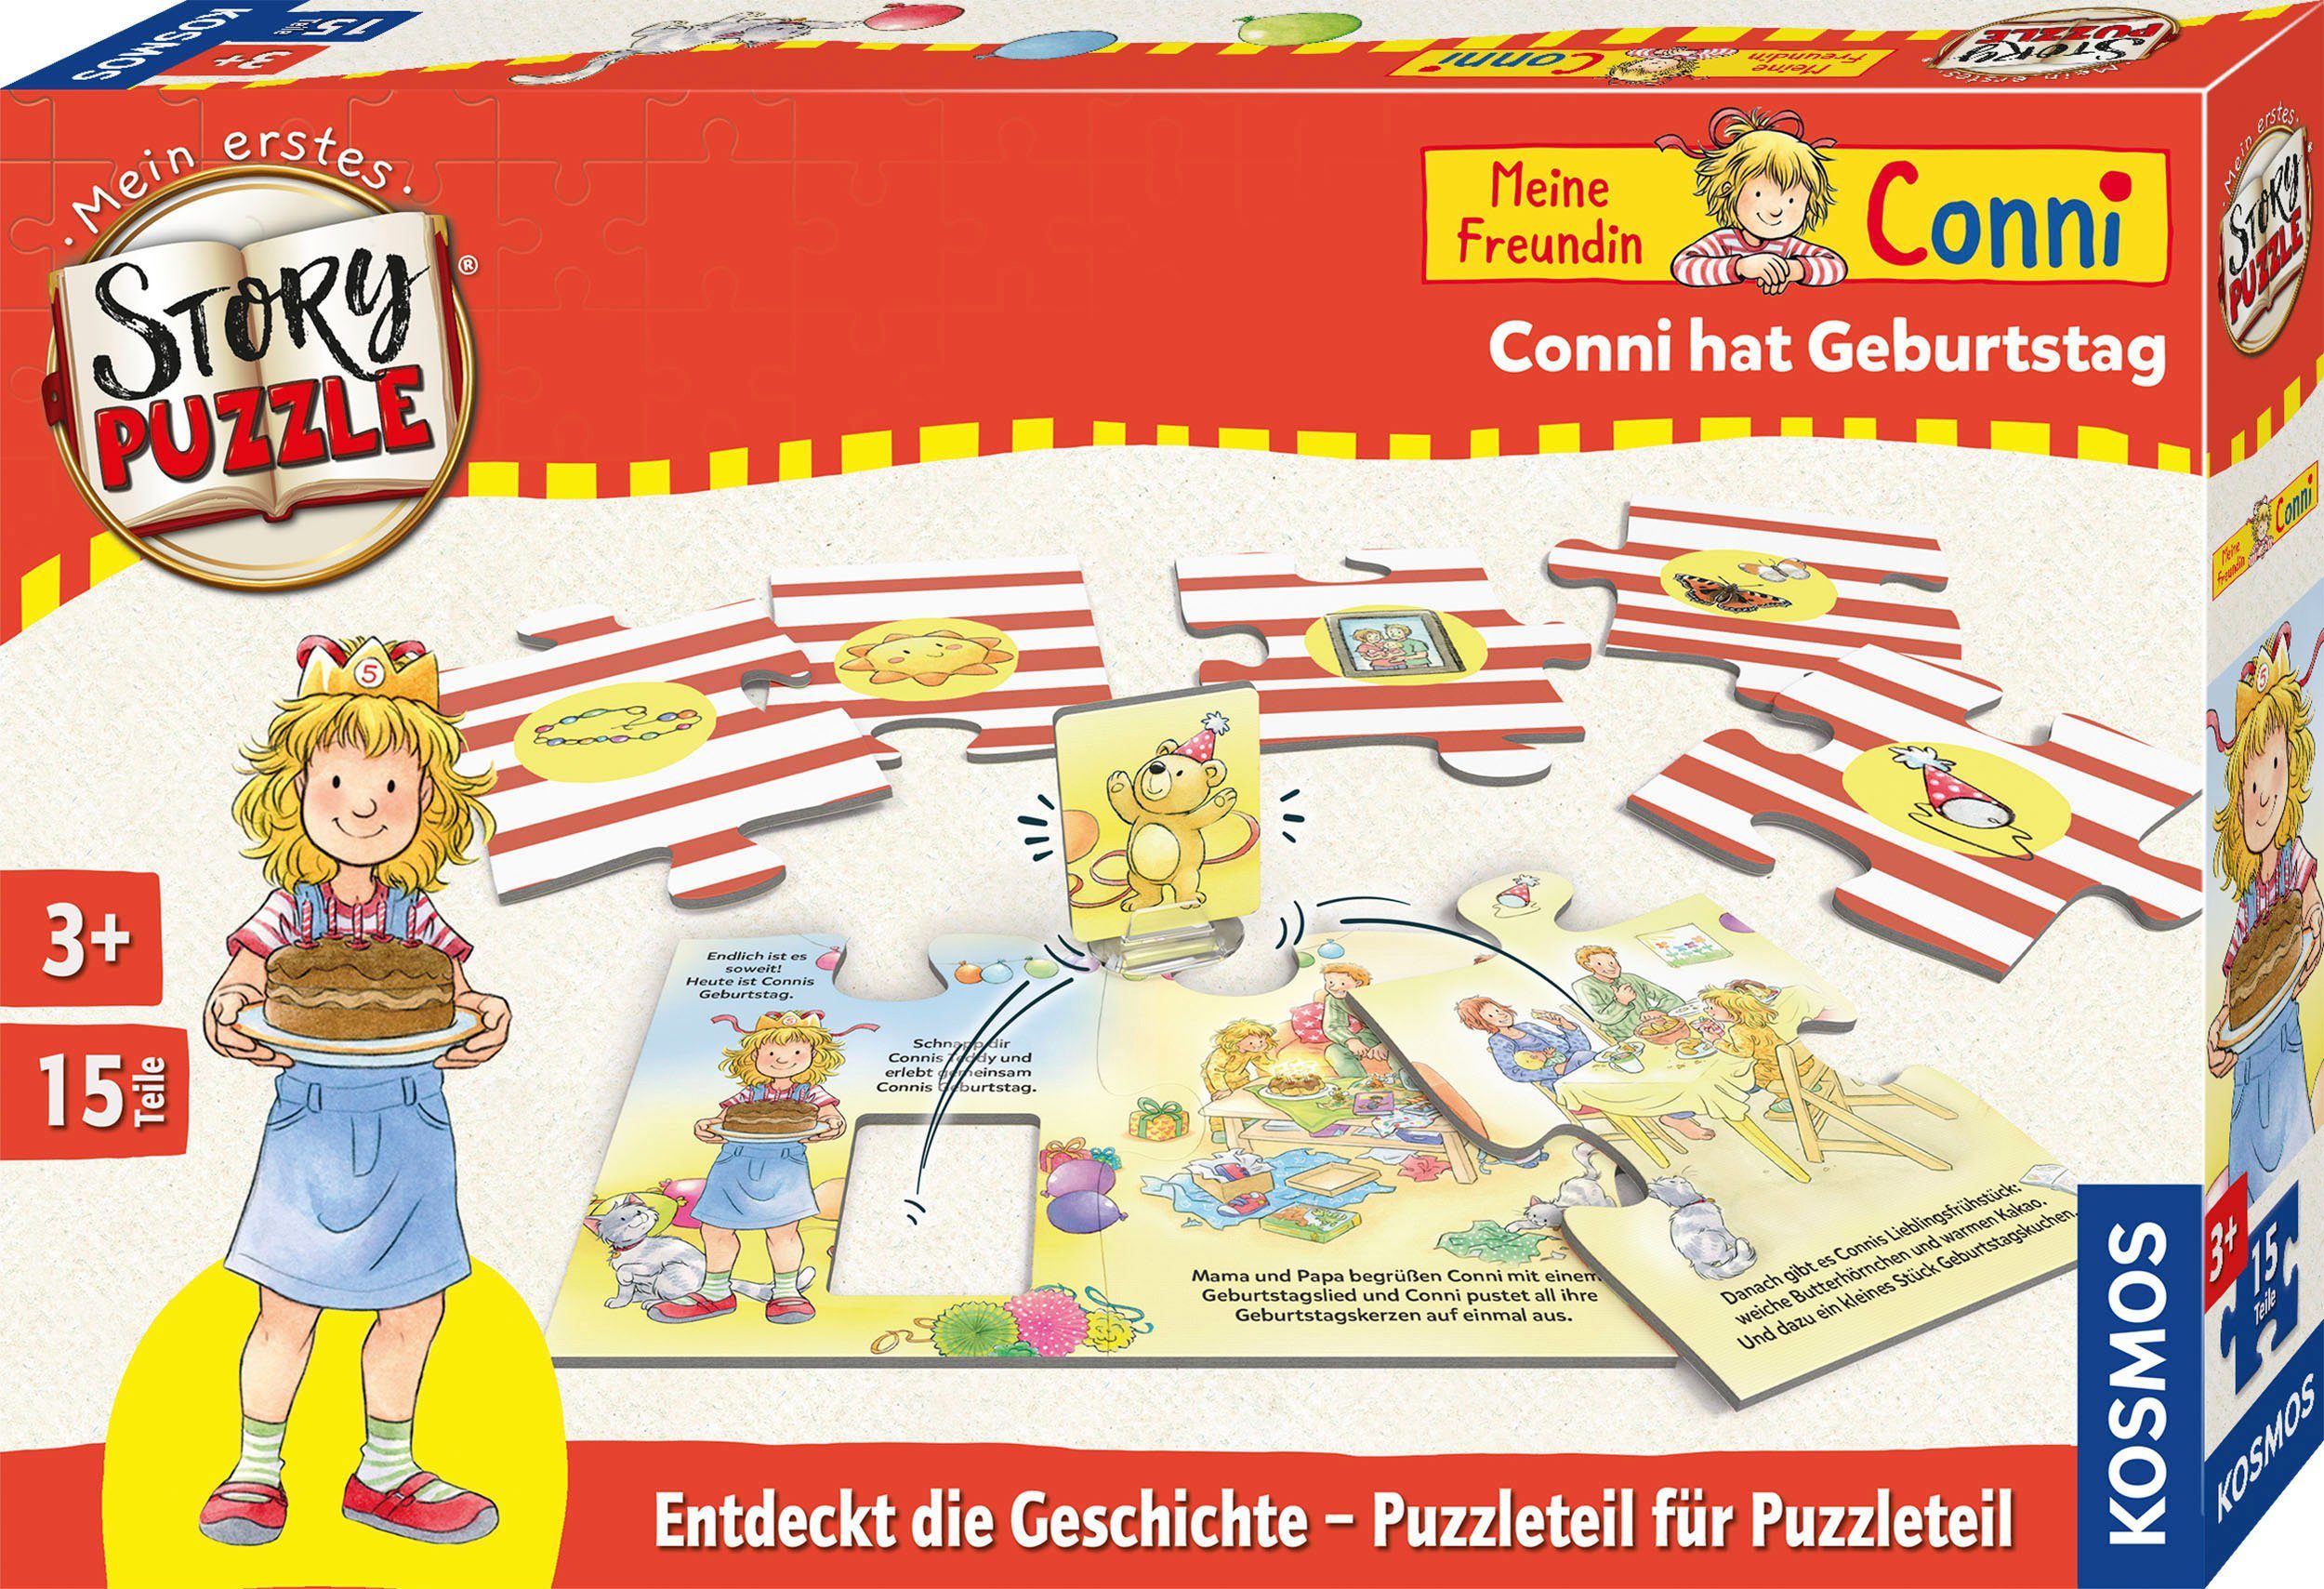 Kosmos Puzzle Mein erstes Story-Puzzle - Conni hat Geburtstag, 15 Puzzleteile, Made in Germany | Puzzle